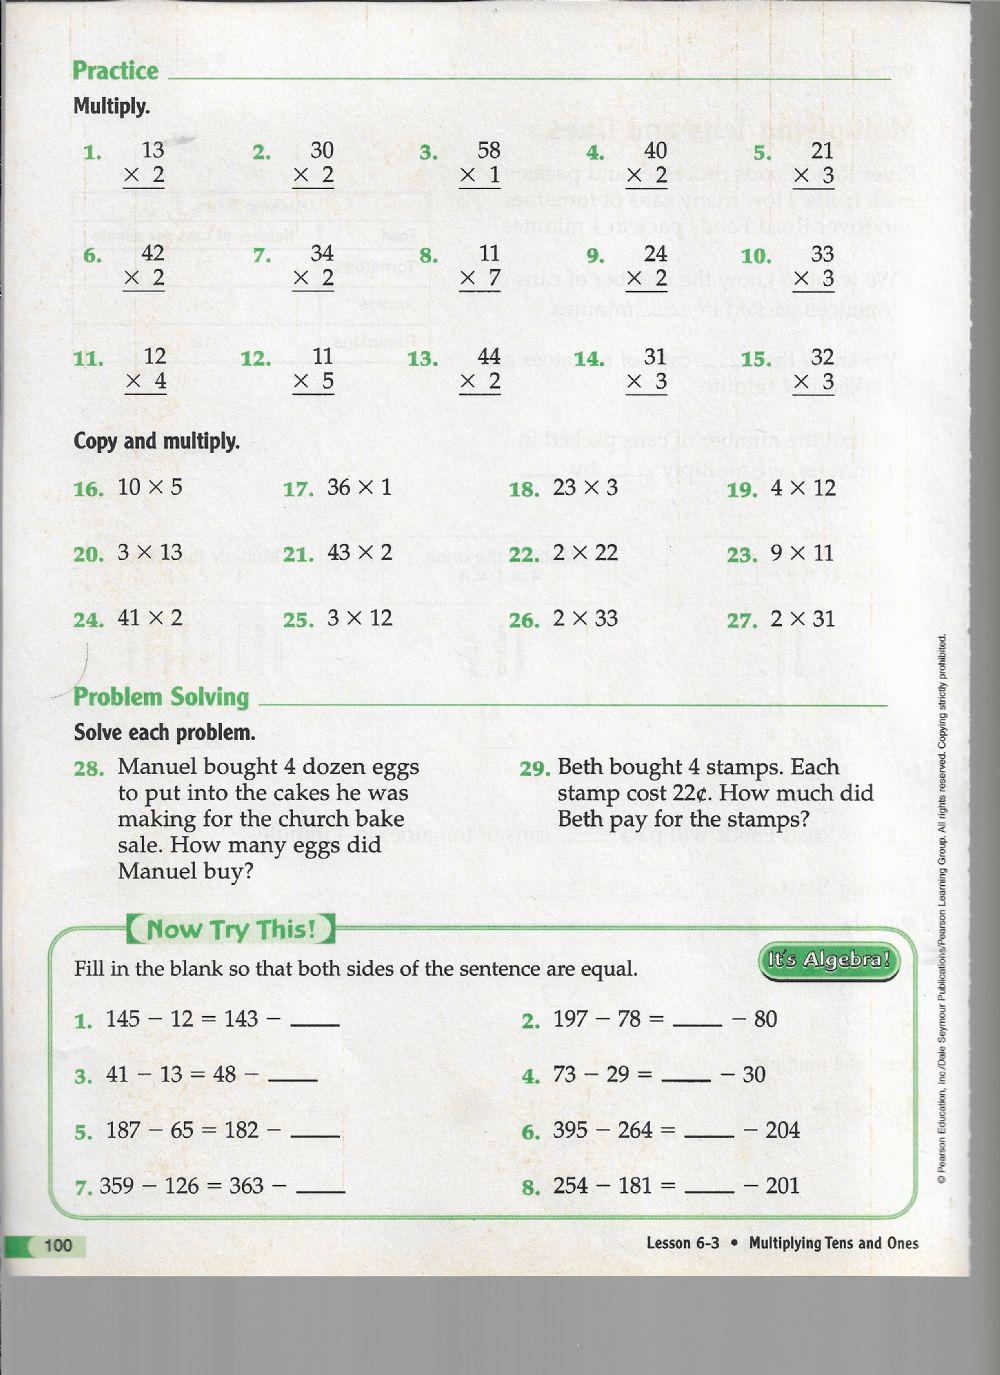 Multiply tens and ones